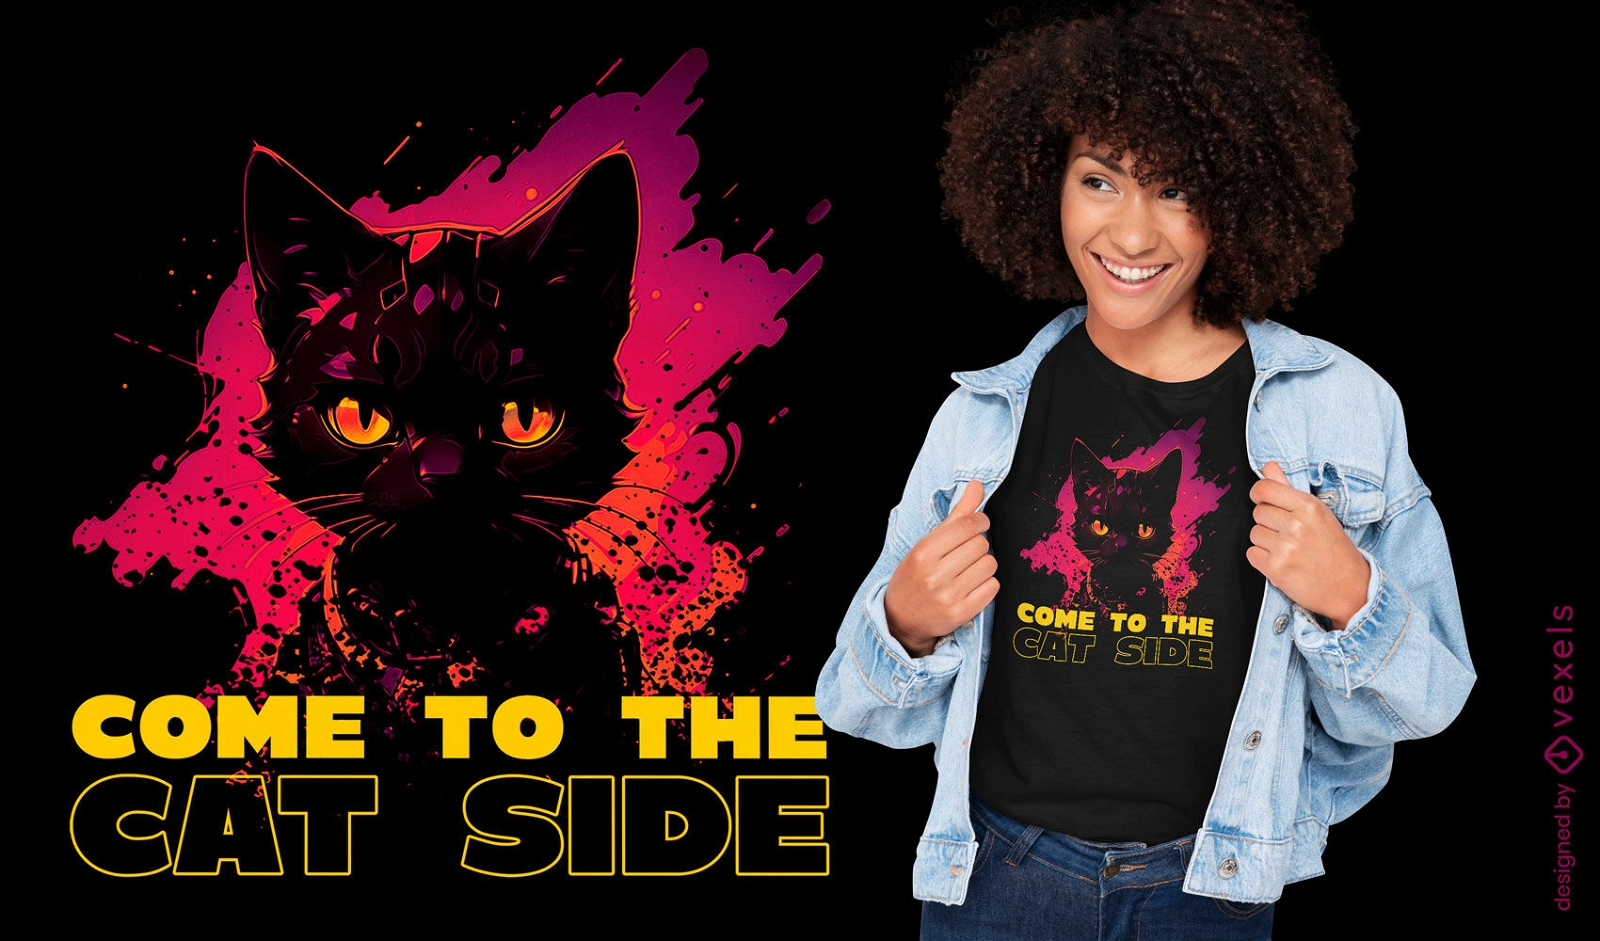 Come to the cat side t-shirt design